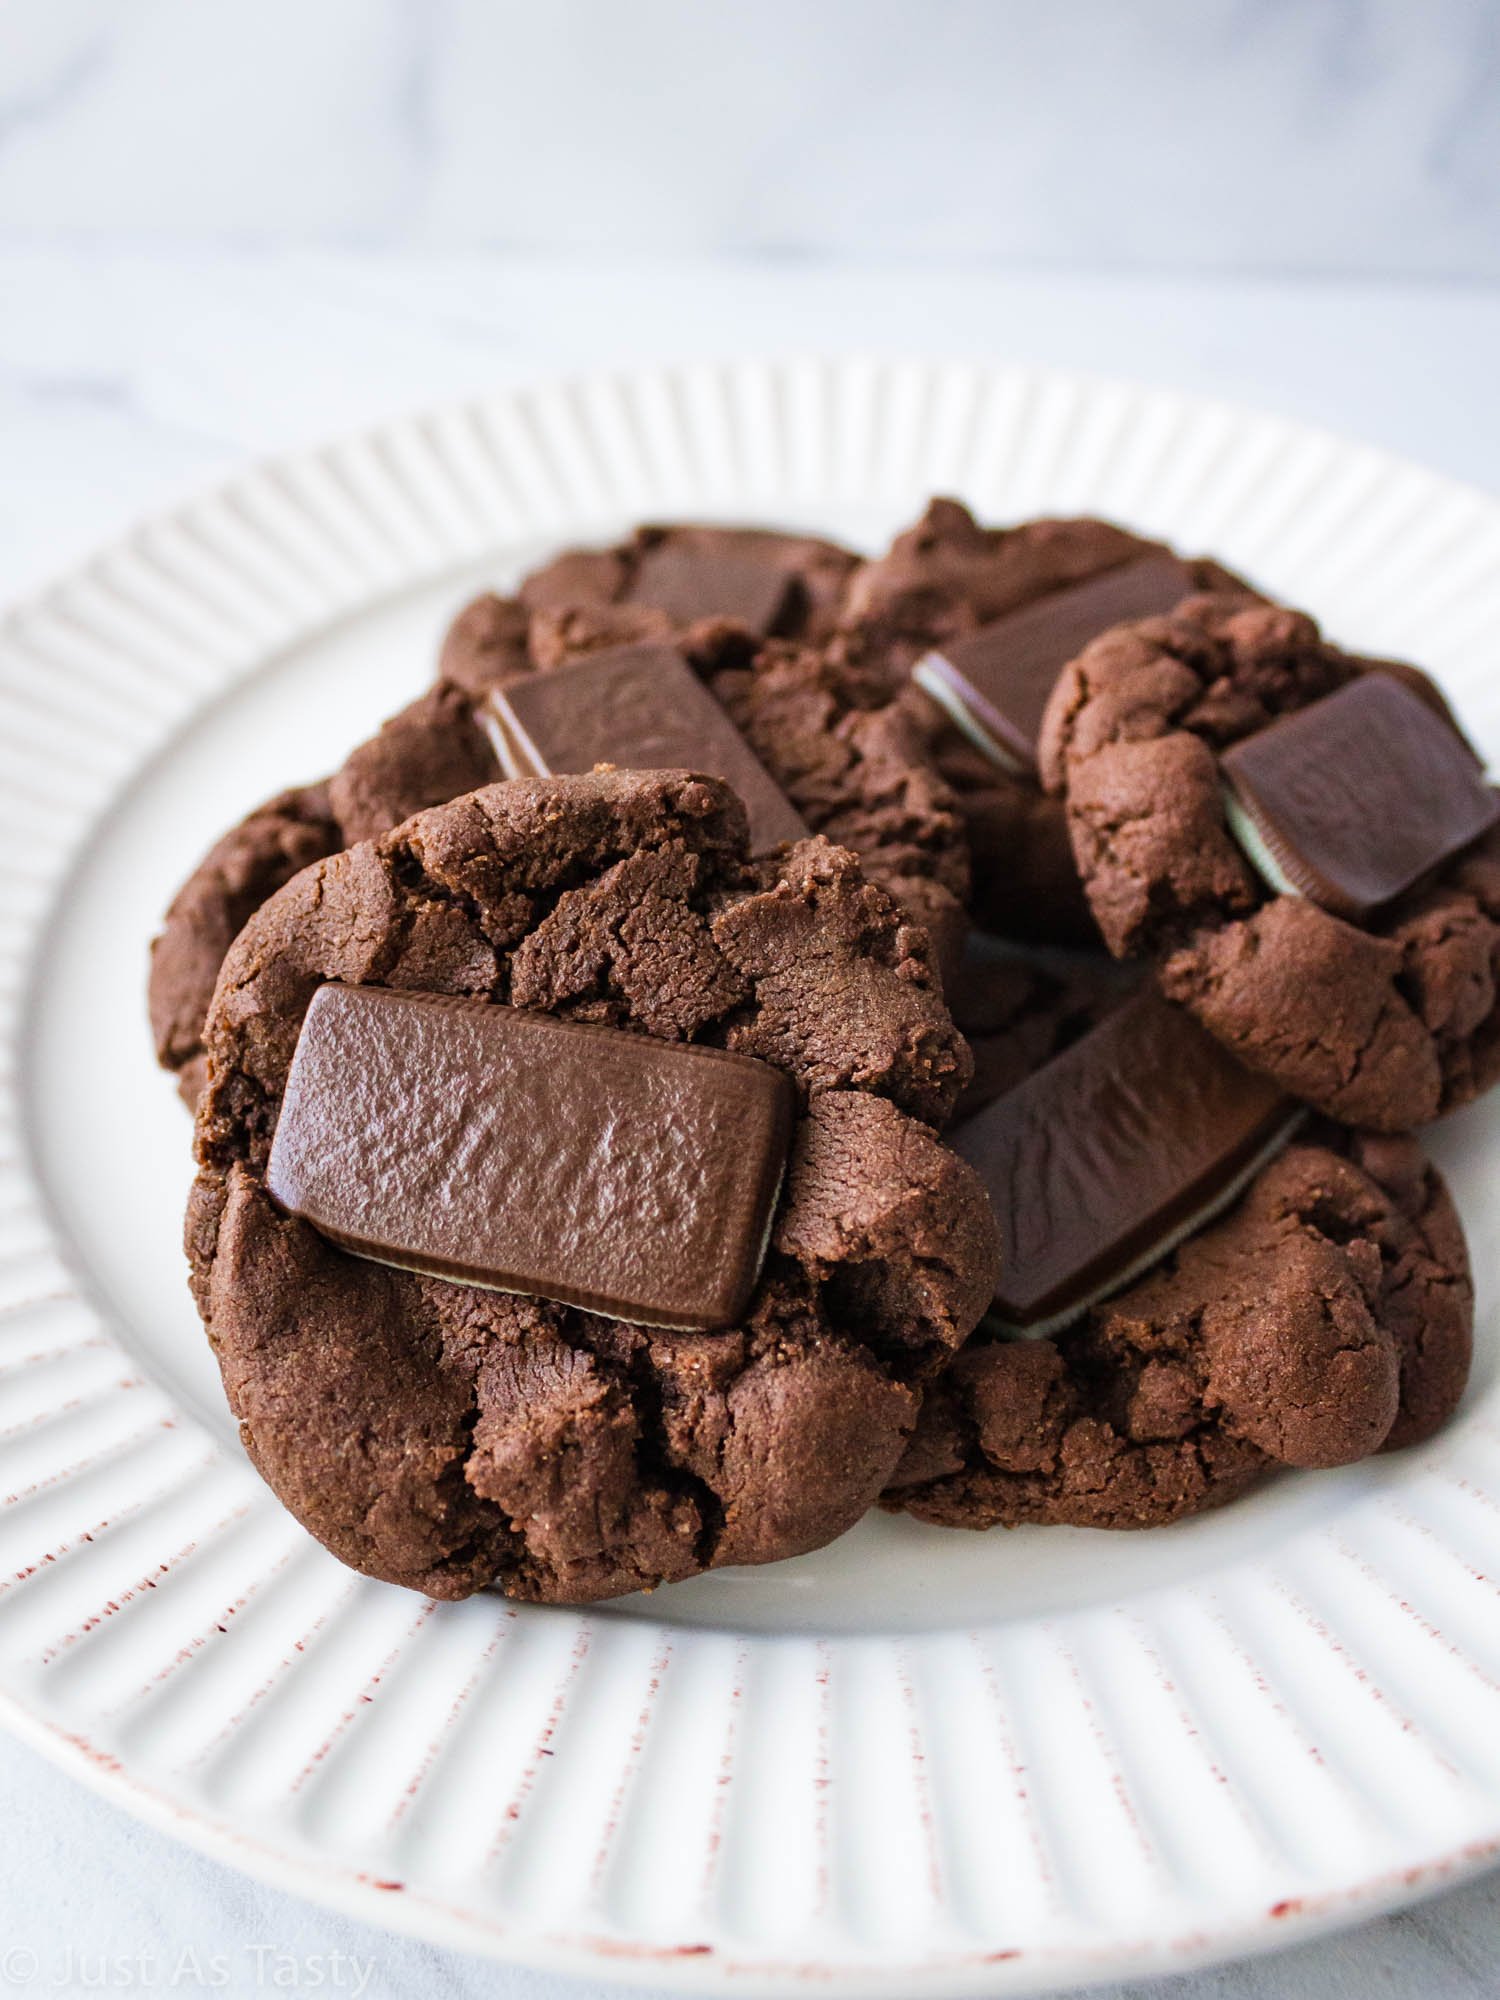 Andes mint chocolate cookies on a white plate.